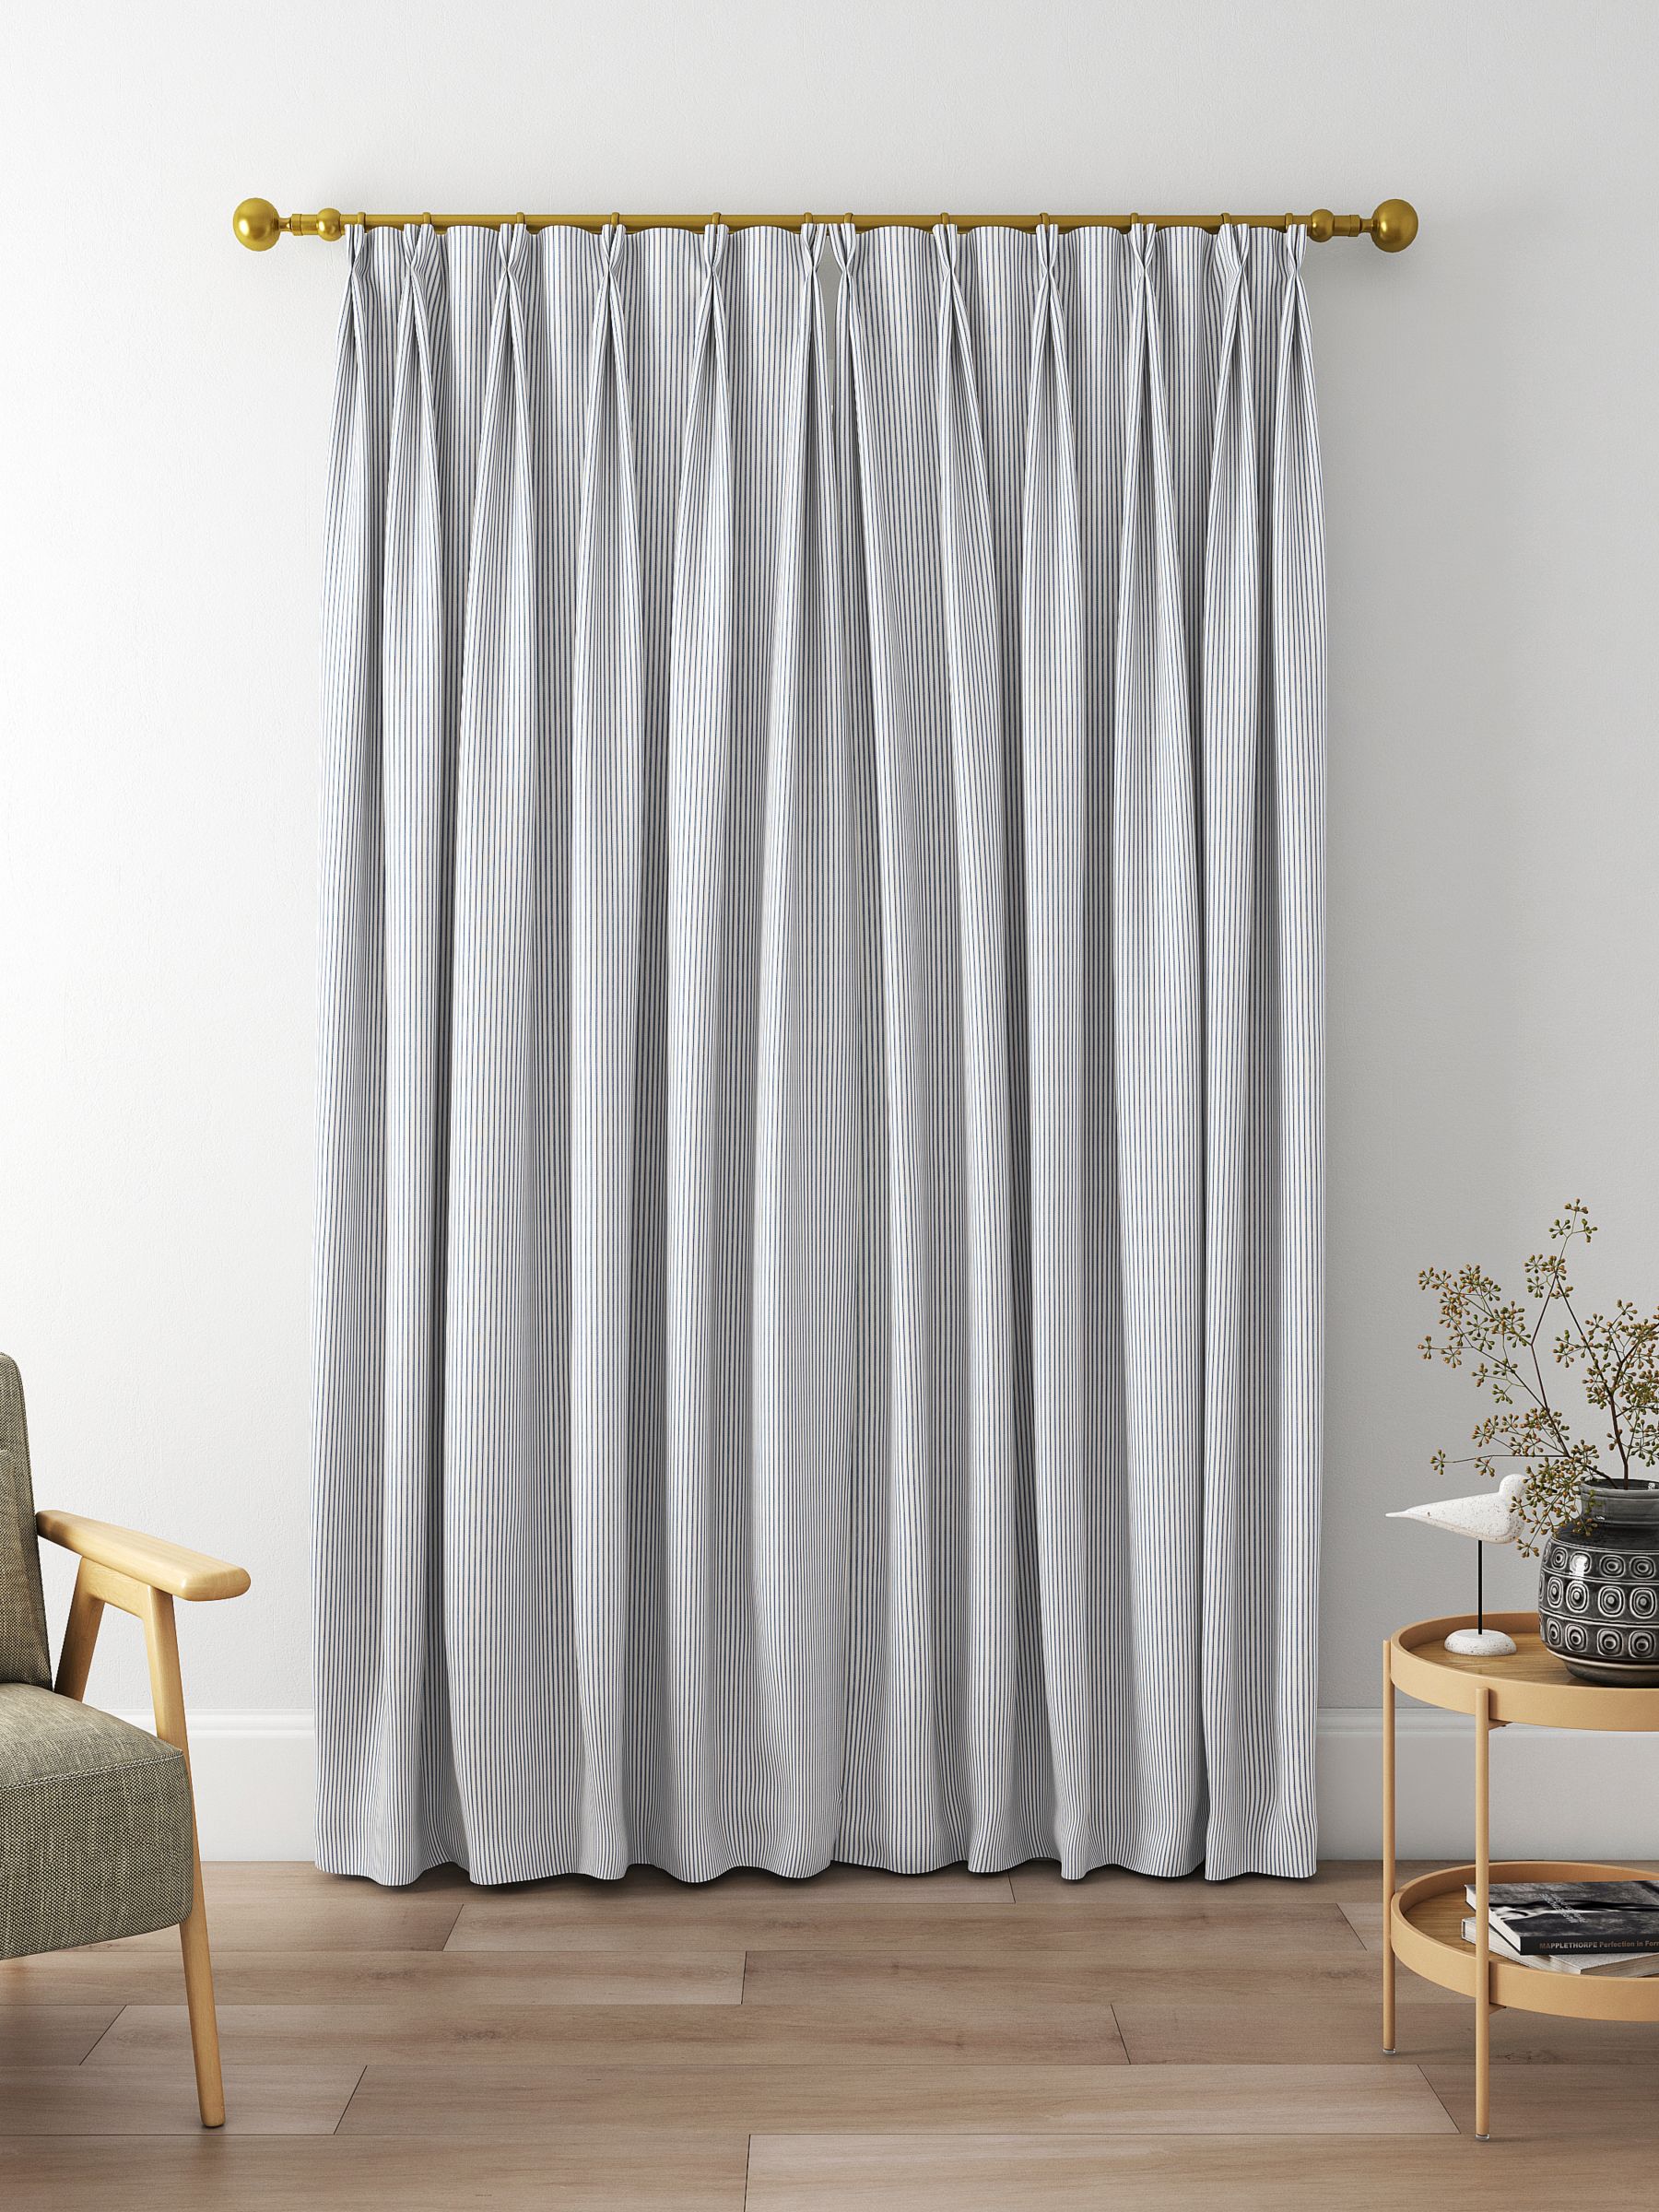 Clarke & Clarke Sutton Made to Measure Curtains, Navy